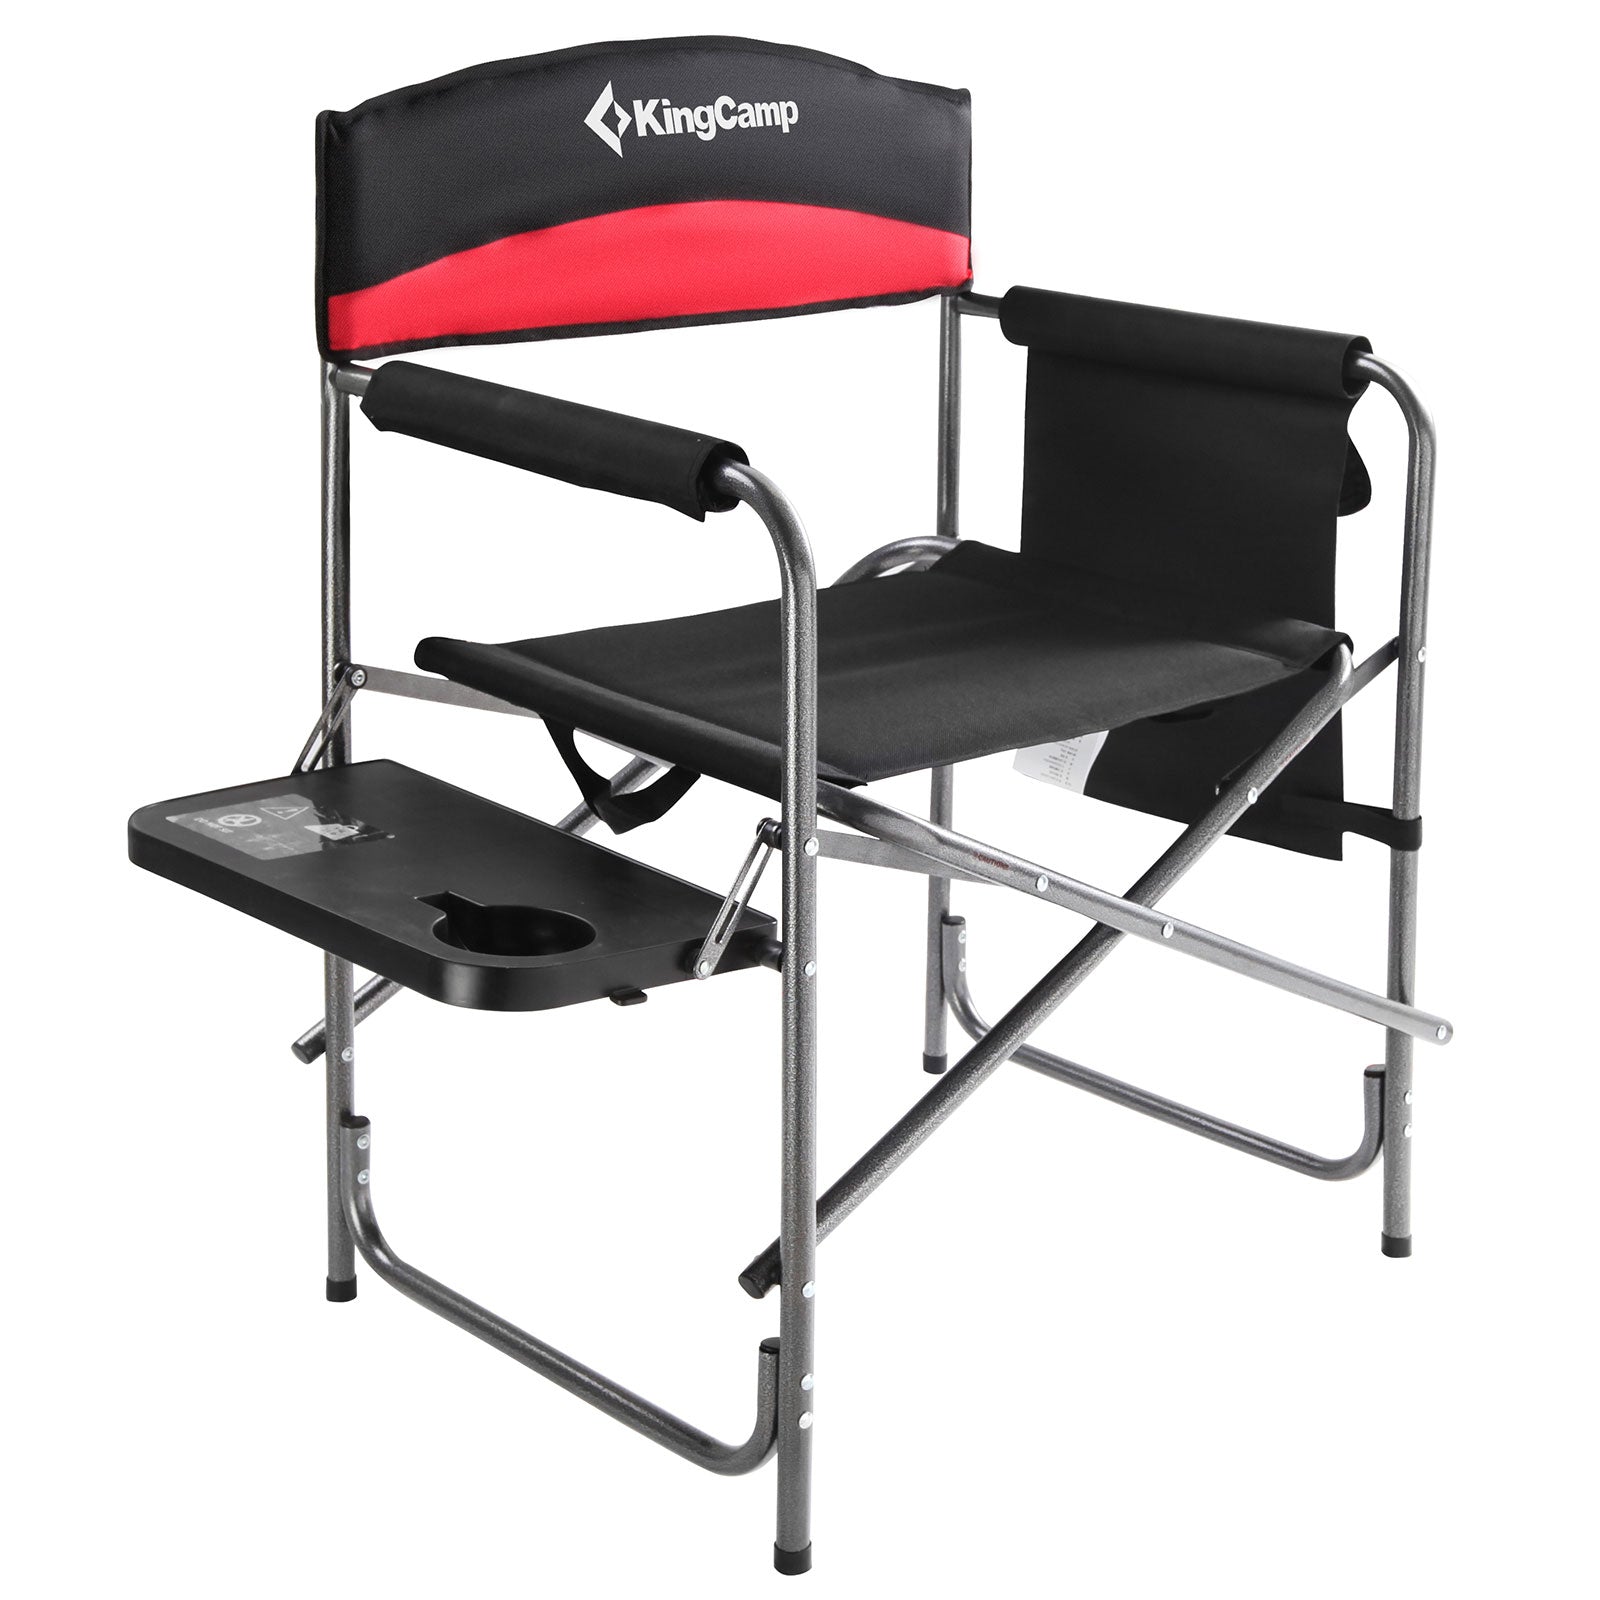 KingCamp Heavy Duty Director Camping Chair